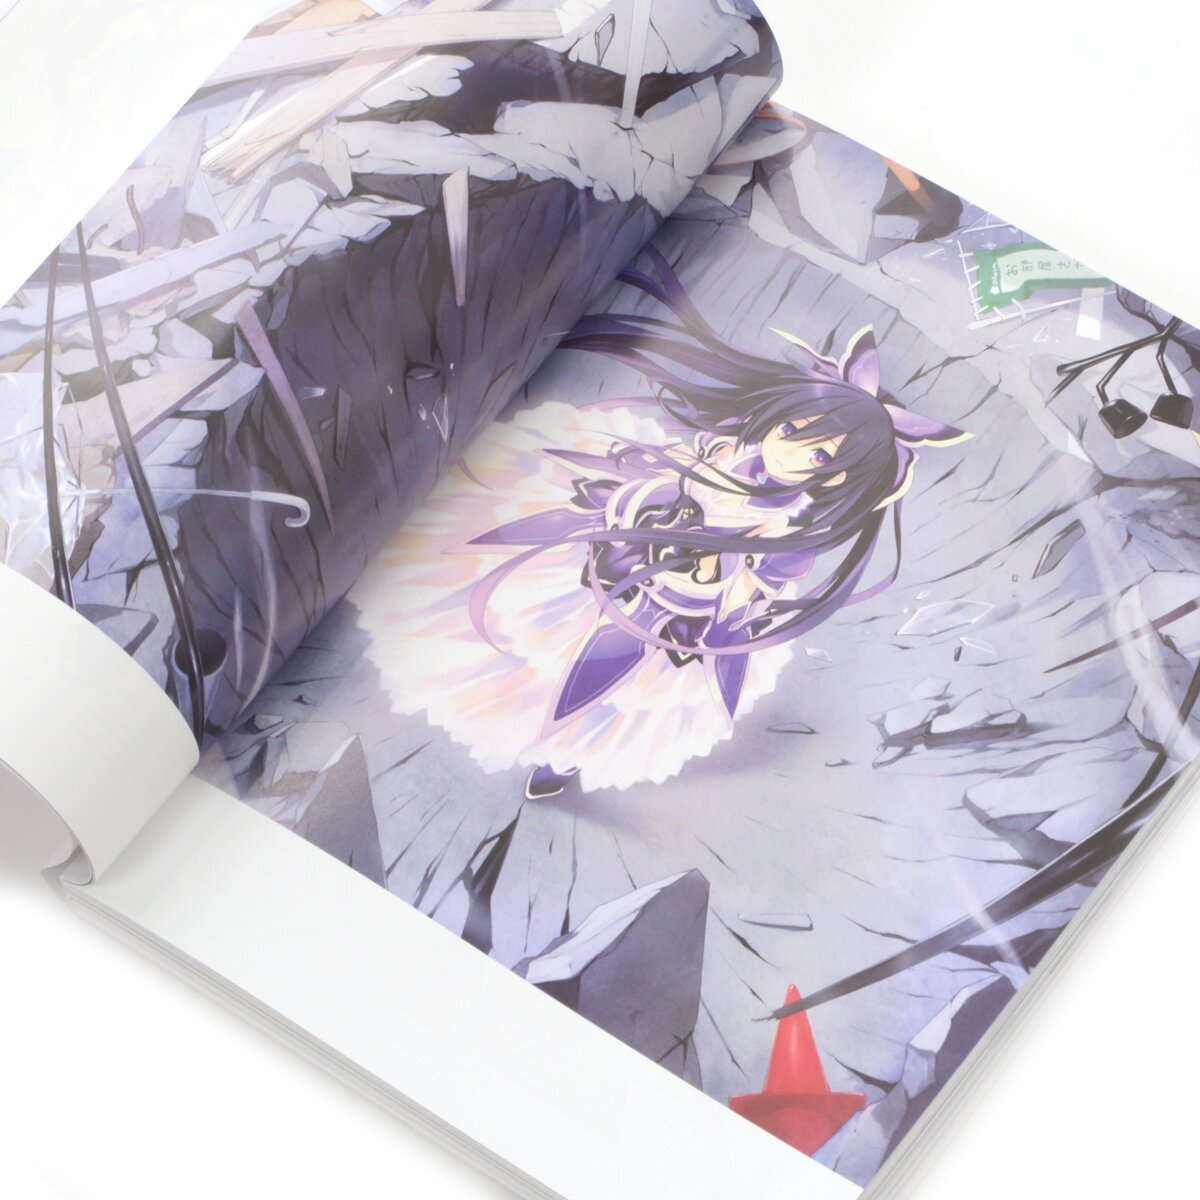 As promised… Here are pictures of Date A Live Tsunako art book